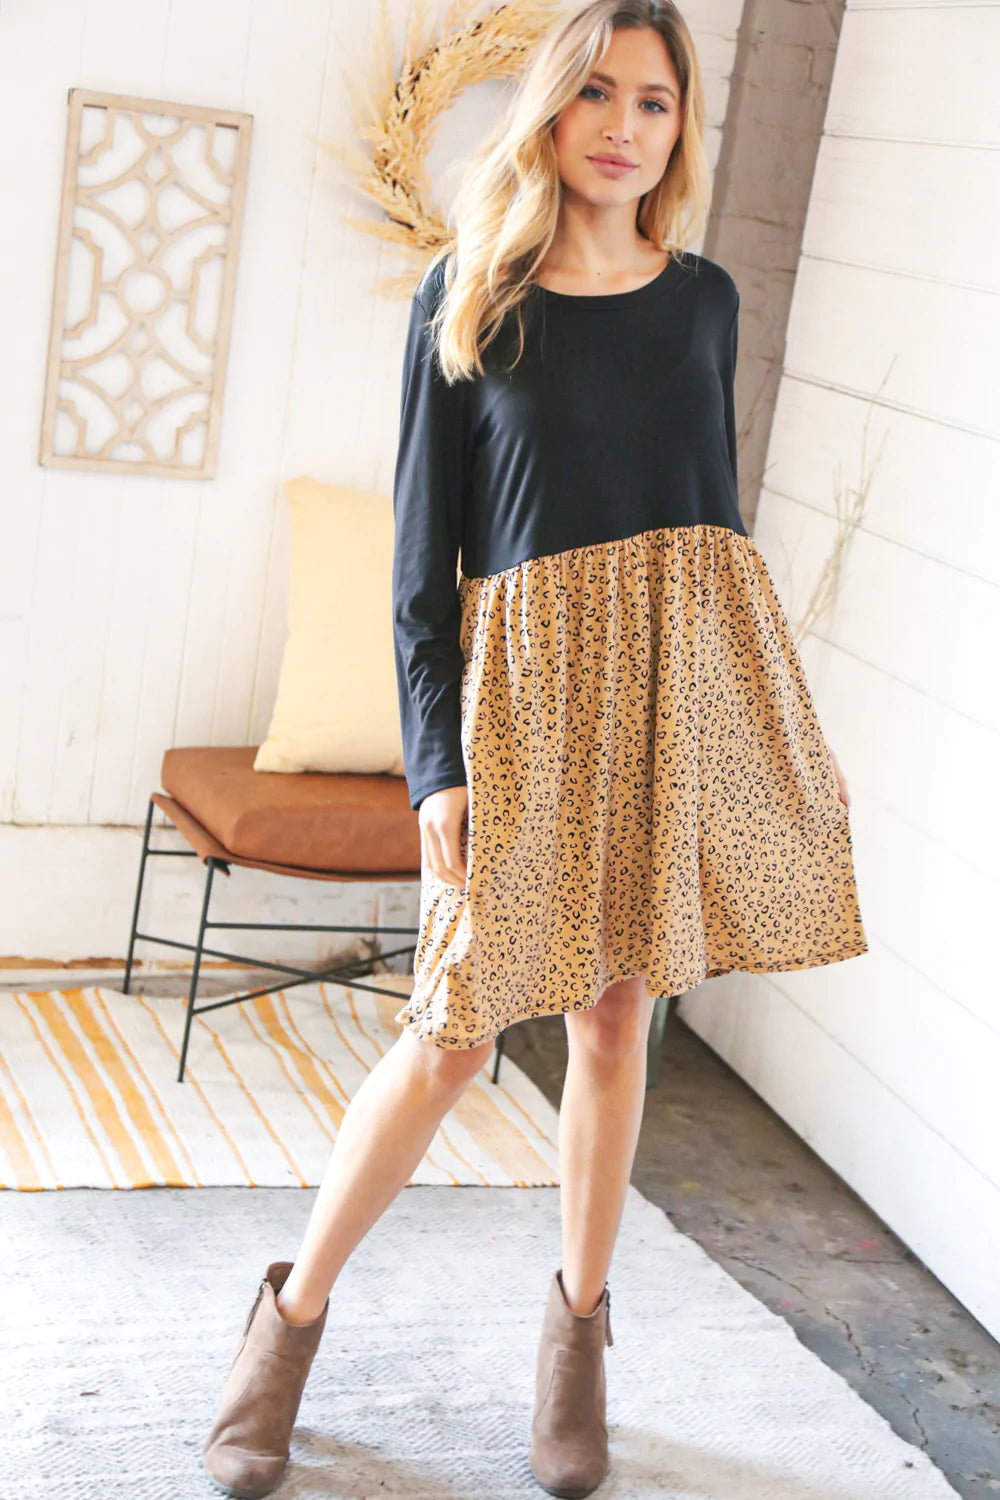 Most Wanted Leopard Dress - Atomic Wildflower